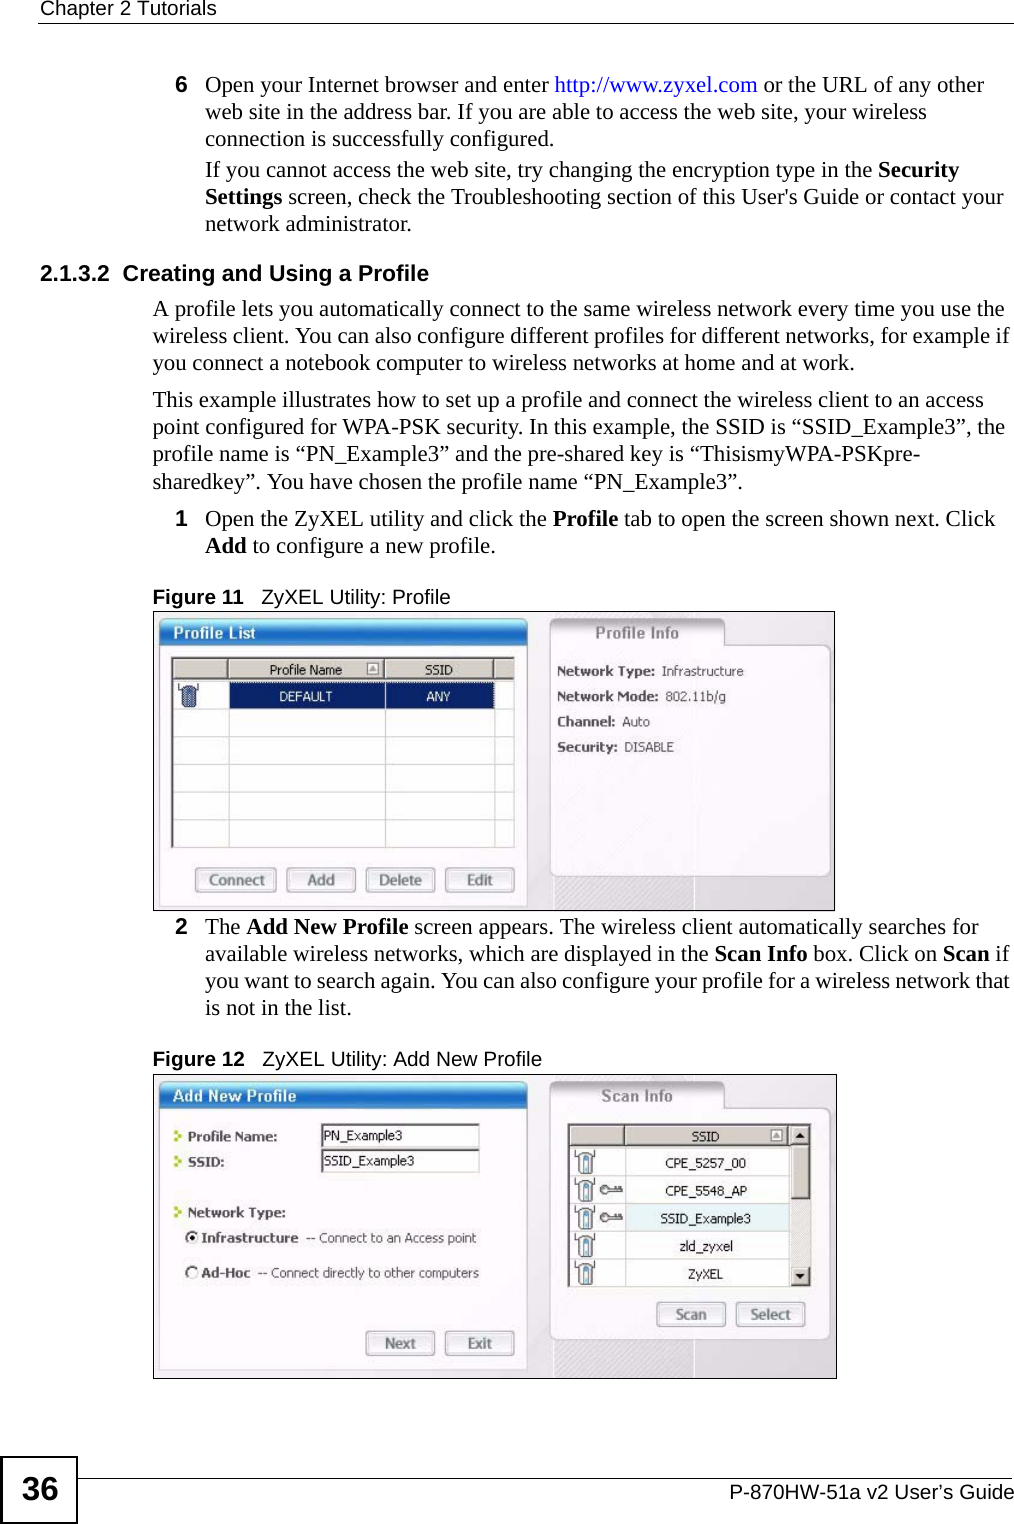 Chapter 2 TutorialsP-870HW-51a v2 User’s Guide366Open your Internet browser and enter http://www.zyxel.com or the URL of any other web site in the address bar. If you are able to access the web site, your wireless connection is successfully configured. If you cannot access the web site, try changing the encryption type in the Security Settings screen, check the Troubleshooting section of this User&apos;s Guide or contact your network administrator.2.1.3.2  Creating and Using a ProfileA profile lets you automatically connect to the same wireless network every time you use the wireless client. You can also configure different profiles for different networks, for example if you connect a notebook computer to wireless networks at home and at work. This example illustrates how to set up a profile and connect the wireless client to an access point configured for WPA-PSK security. In this example, the SSID is “SSID_Example3”, the profile name is “PN_Example3” and the pre-shared key is “ThisismyWPA-PSKpre-sharedkey”. You have chosen the profile name “PN_Example3”.1Open the ZyXEL utility and click the Profile tab to open the screen shown next. Click Add to configure a new profile.Figure 11   ZyXEL Utility: Profile2The Add New Profile screen appears. The wireless client automatically searches for available wireless networks, which are displayed in the Scan Info box. Click on Scan if you want to search again. You can also configure your profile for a wireless network that is not in the list.Figure 12   ZyXEL Utility: Add New Profile